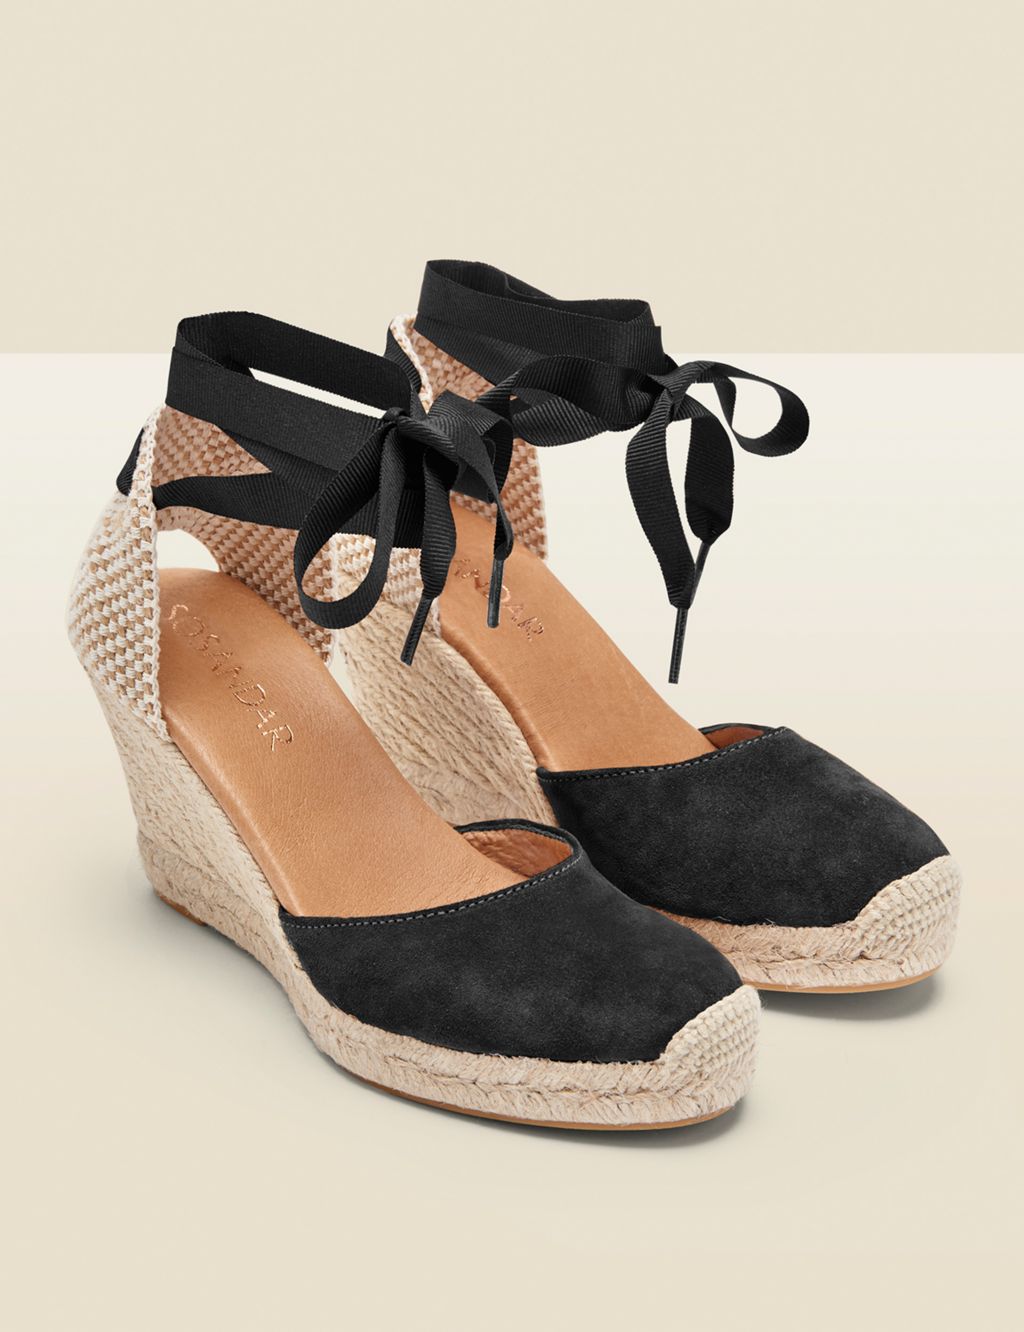 Suede Lace Up Wedge Espadrilles image 1